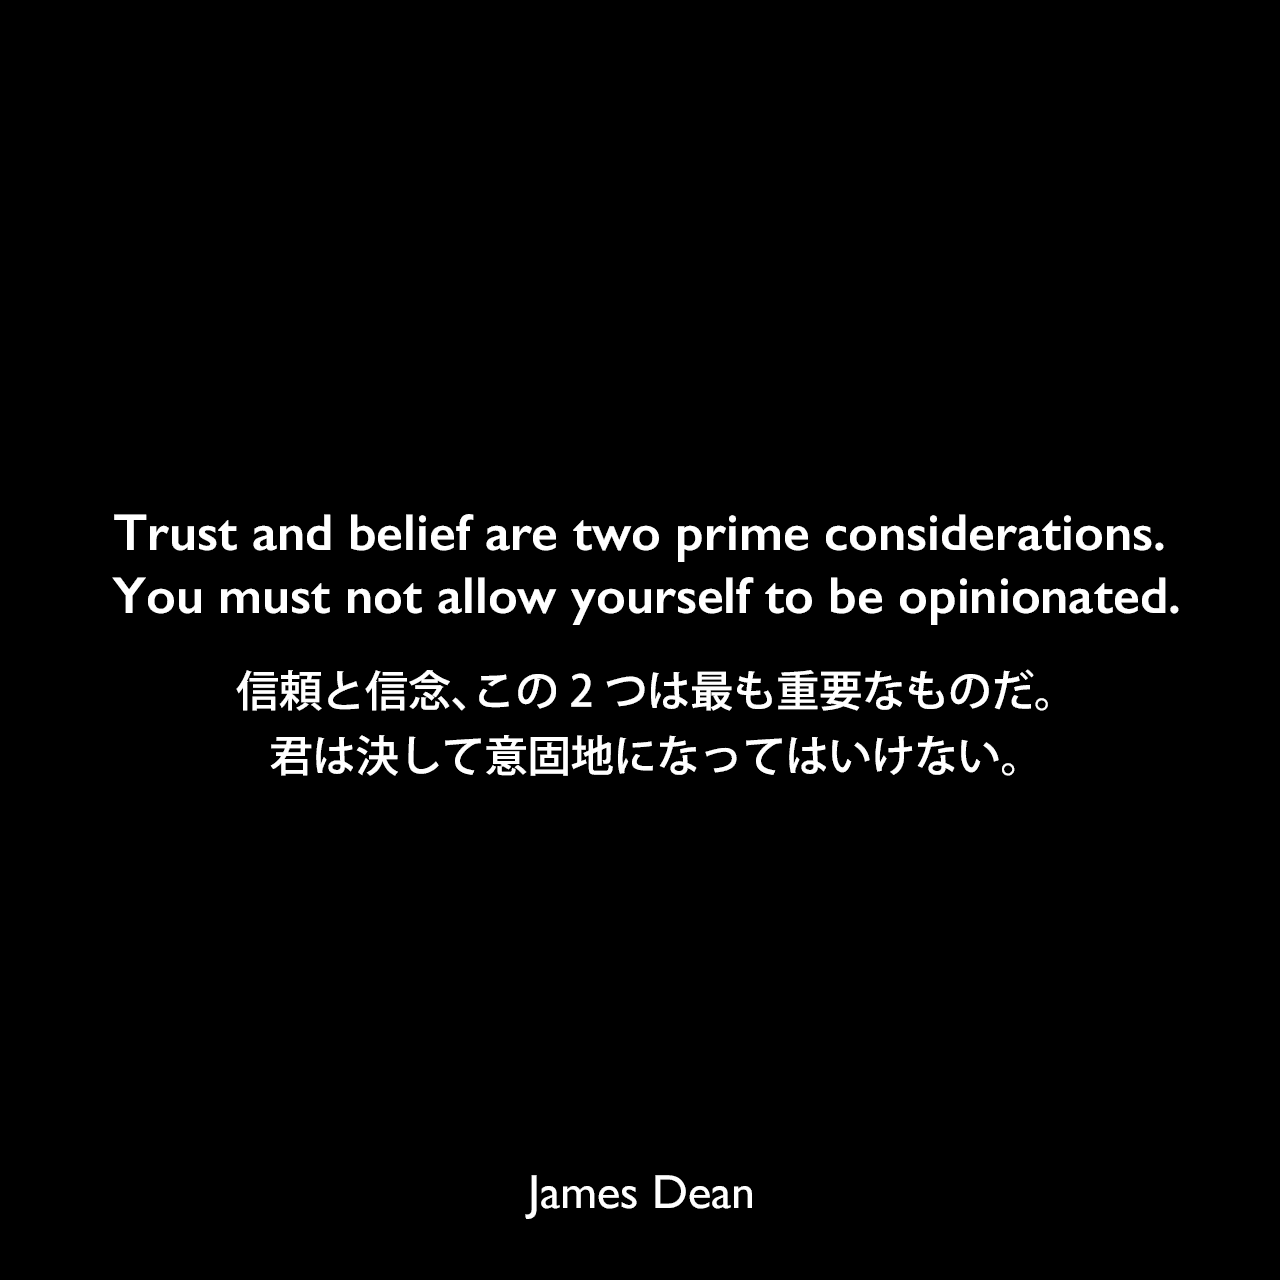 Trust and belief are two prime considerations. You must not allow yourself to be opinionated.信頼と信念、この2つは最も重要なものだ。君は決して意固地になってはいけない。James Dean